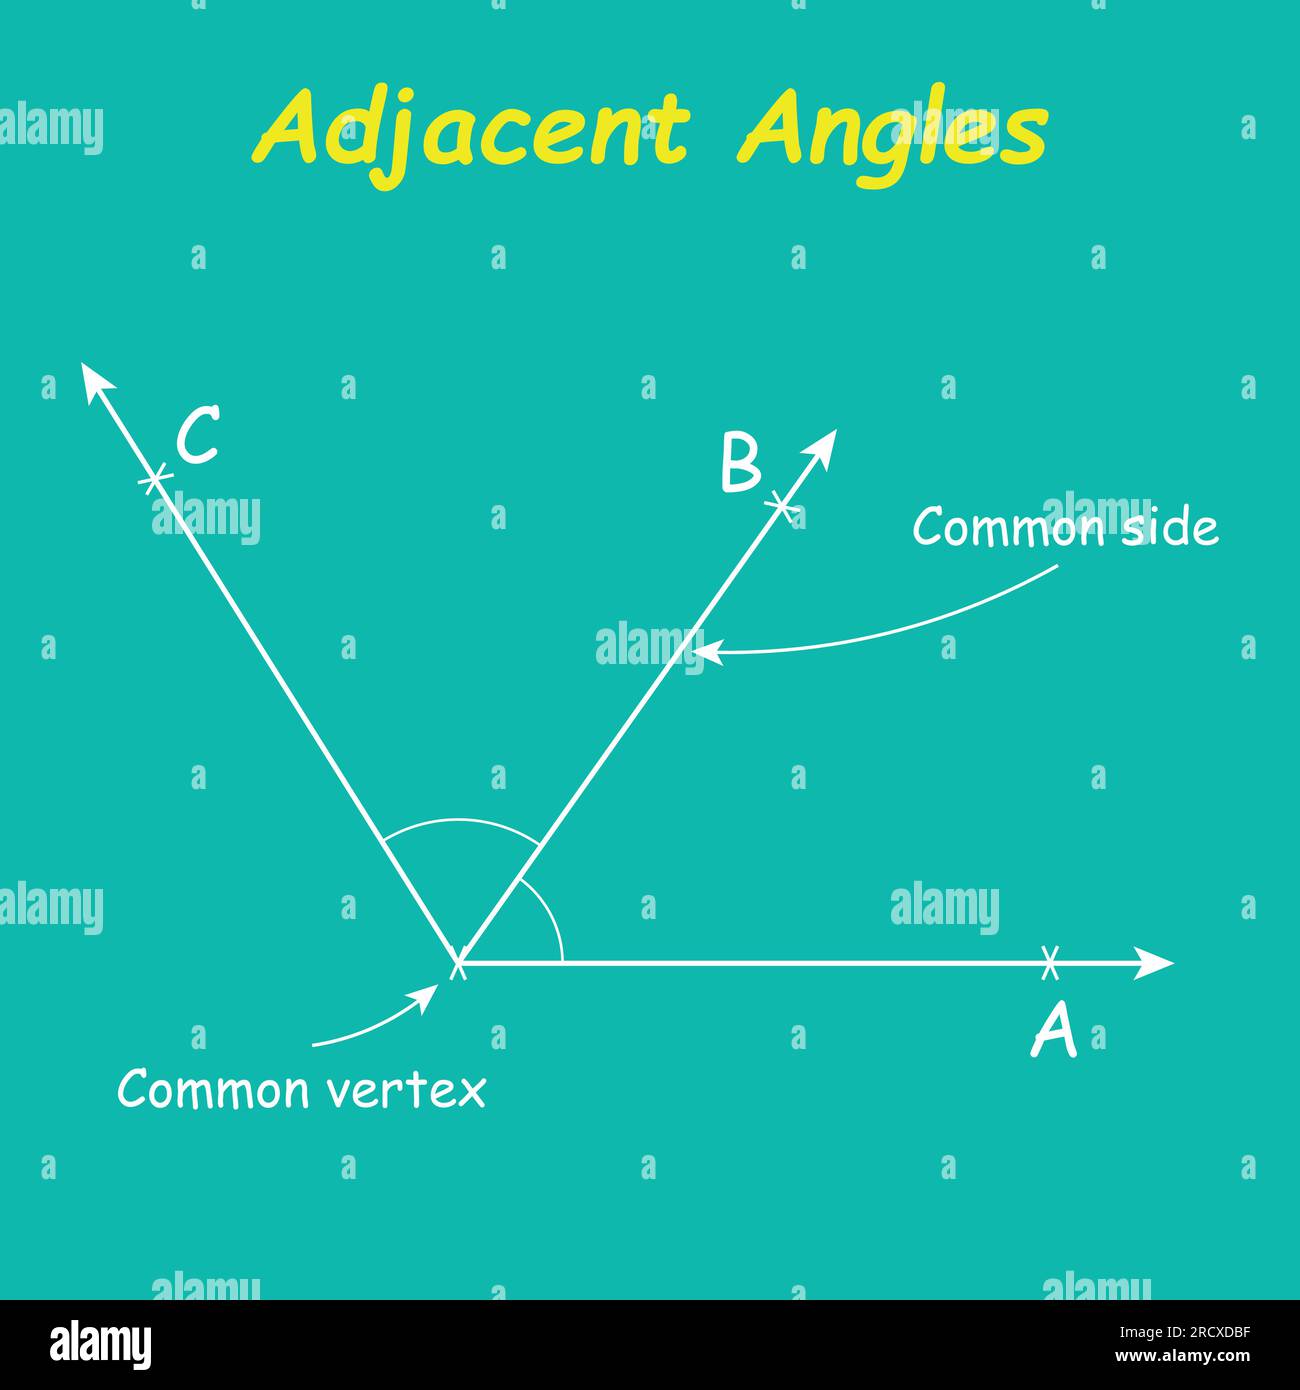 Adjacent angles in mathematics. Two angles with common vertex and side. Vector illustration isolated on chalkboard. Stock Vector